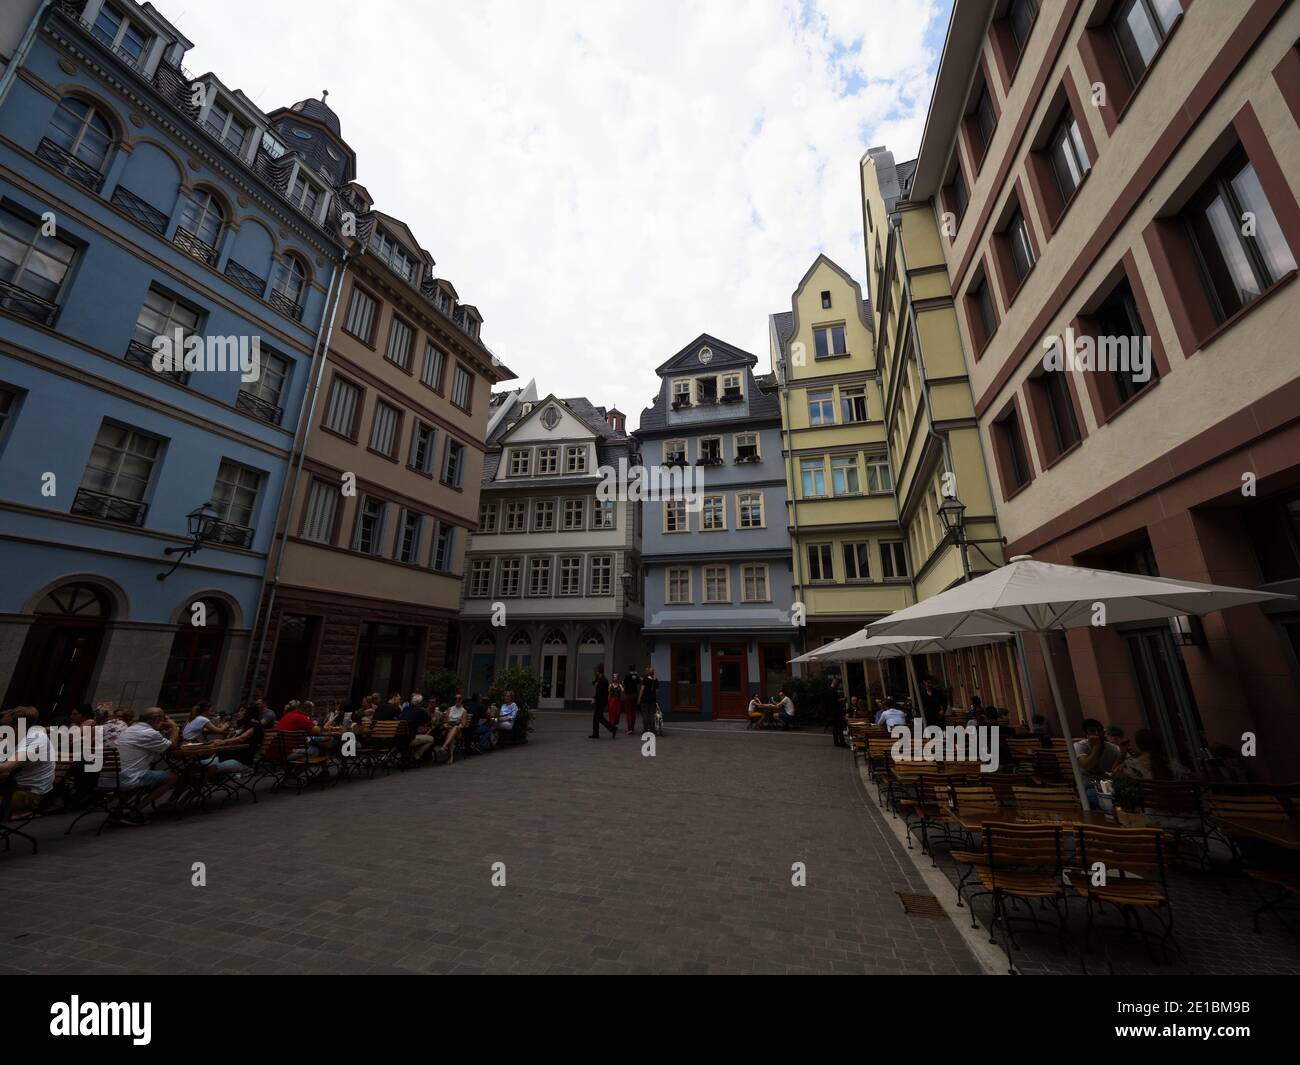 Panorama of Huehnermarkt Huhnermarkt chicken market square historic facade buildings old town centre of Frankfurt am Main Hesse Germany Europe Stock Photo